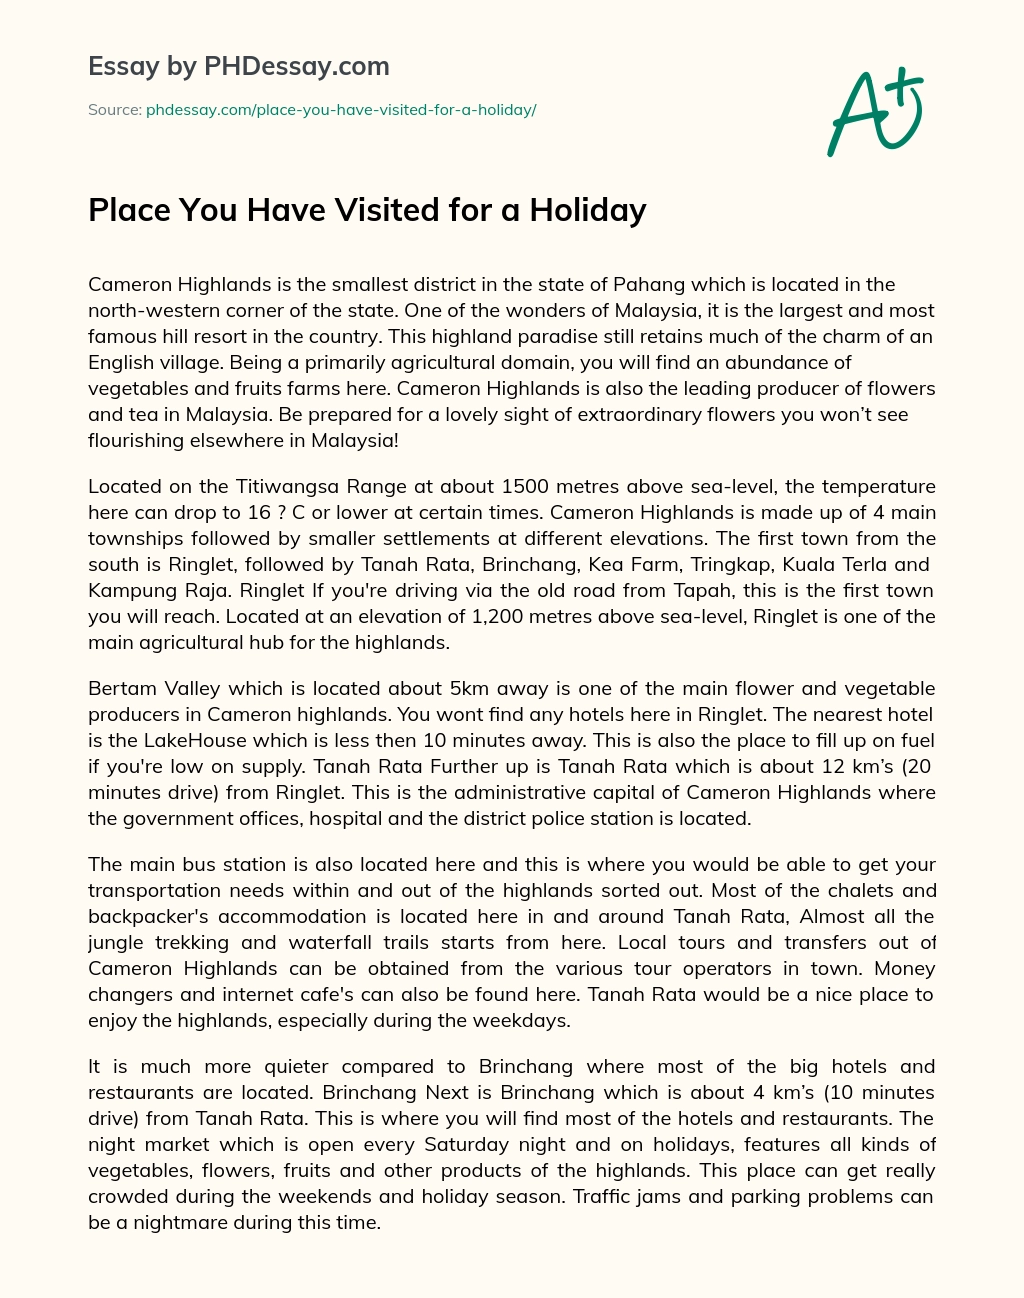 Place You Have Visited for a Holiday essay